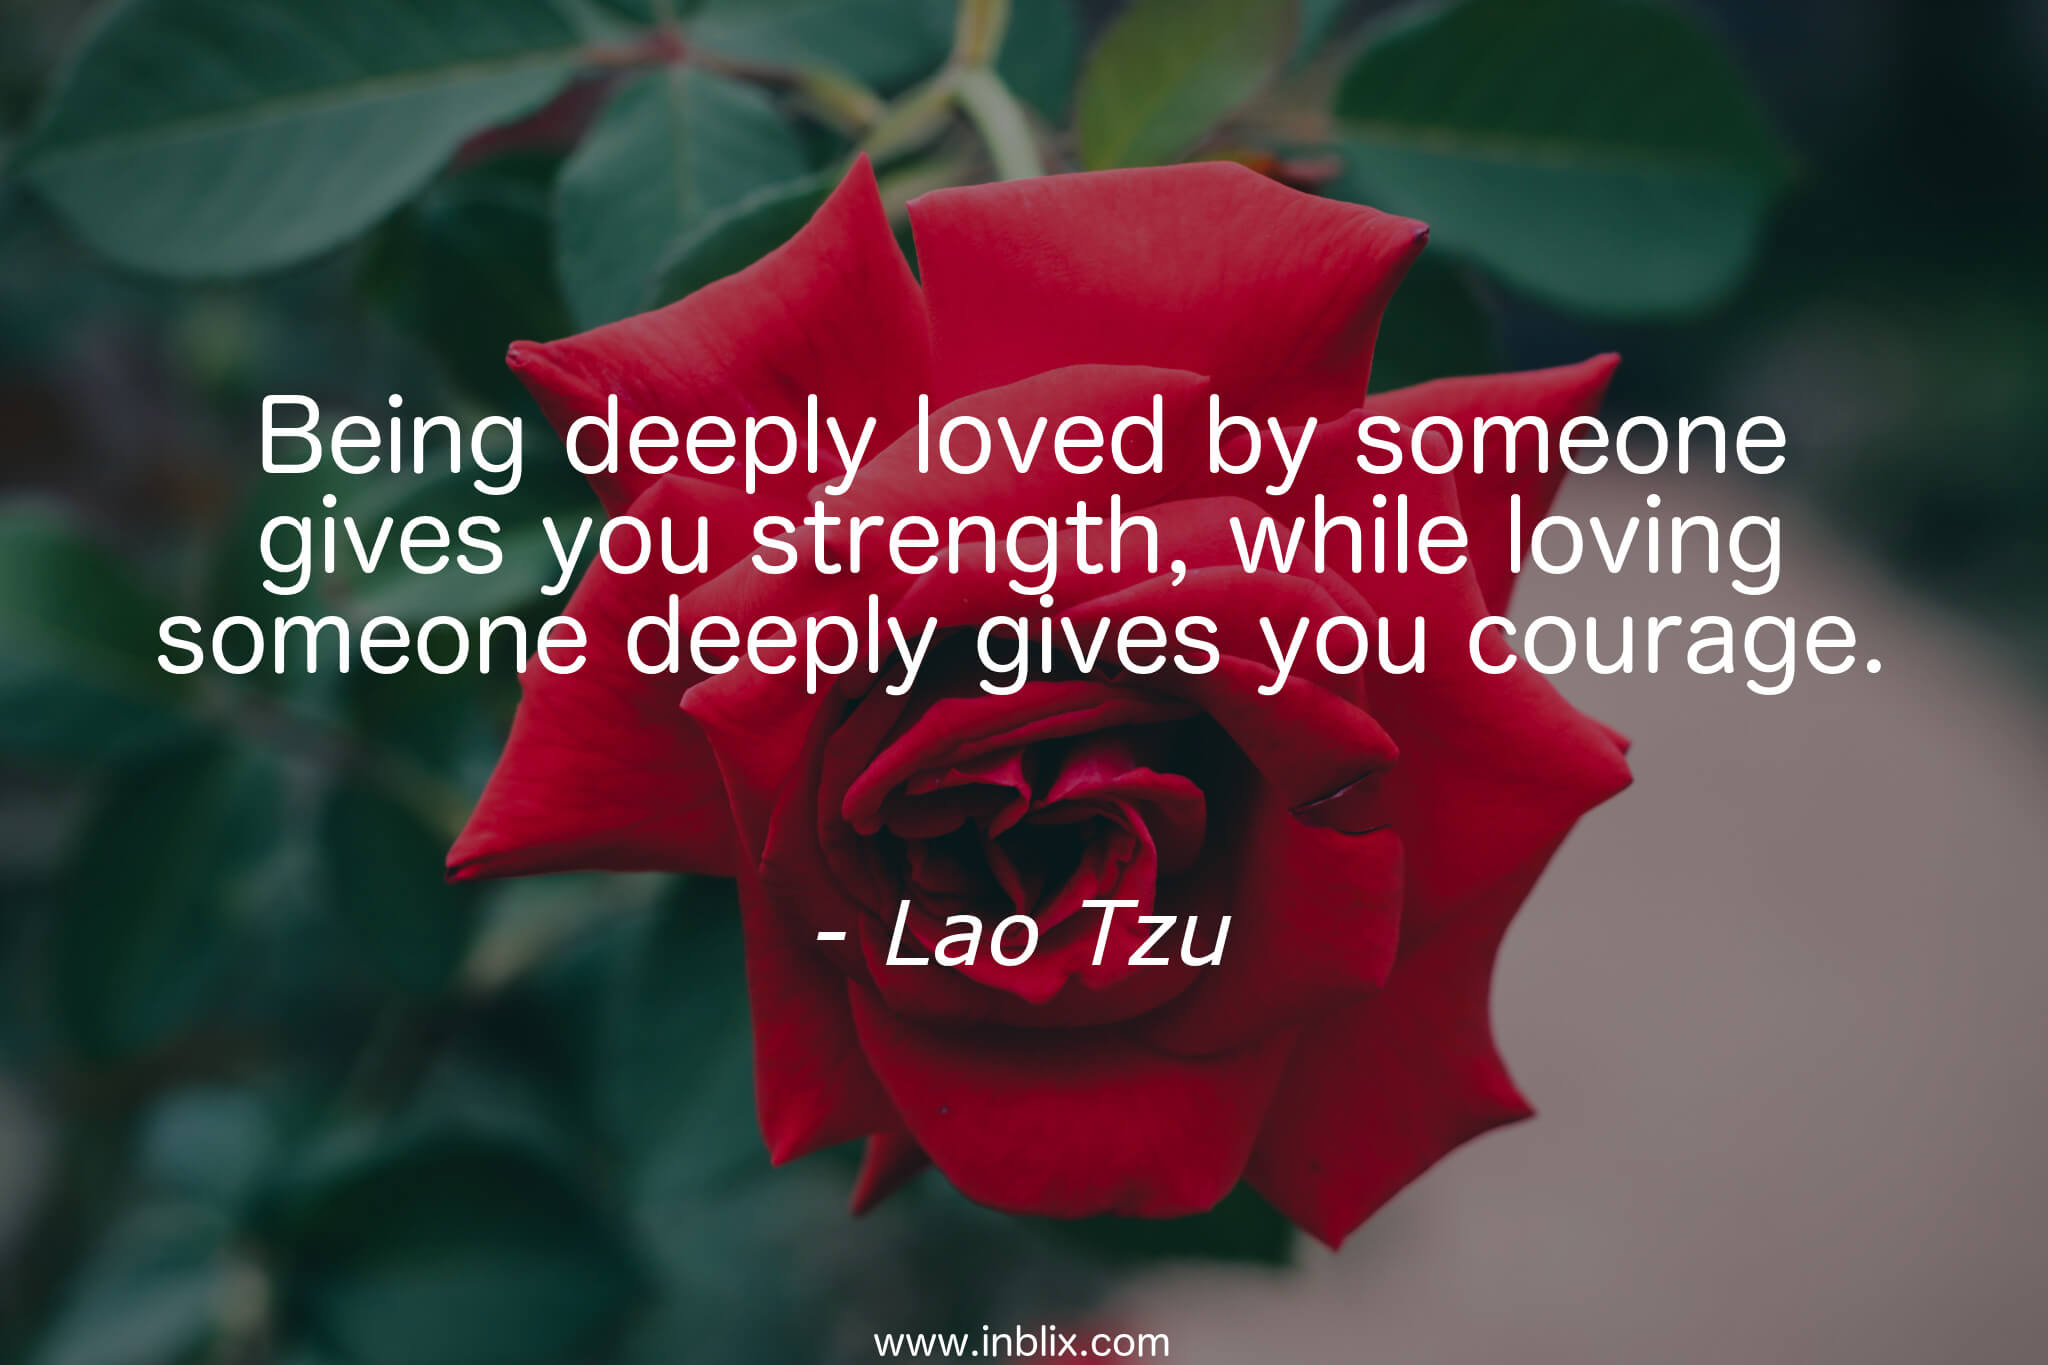 Being deeply loved by someone by Lao Tzu | InBlix